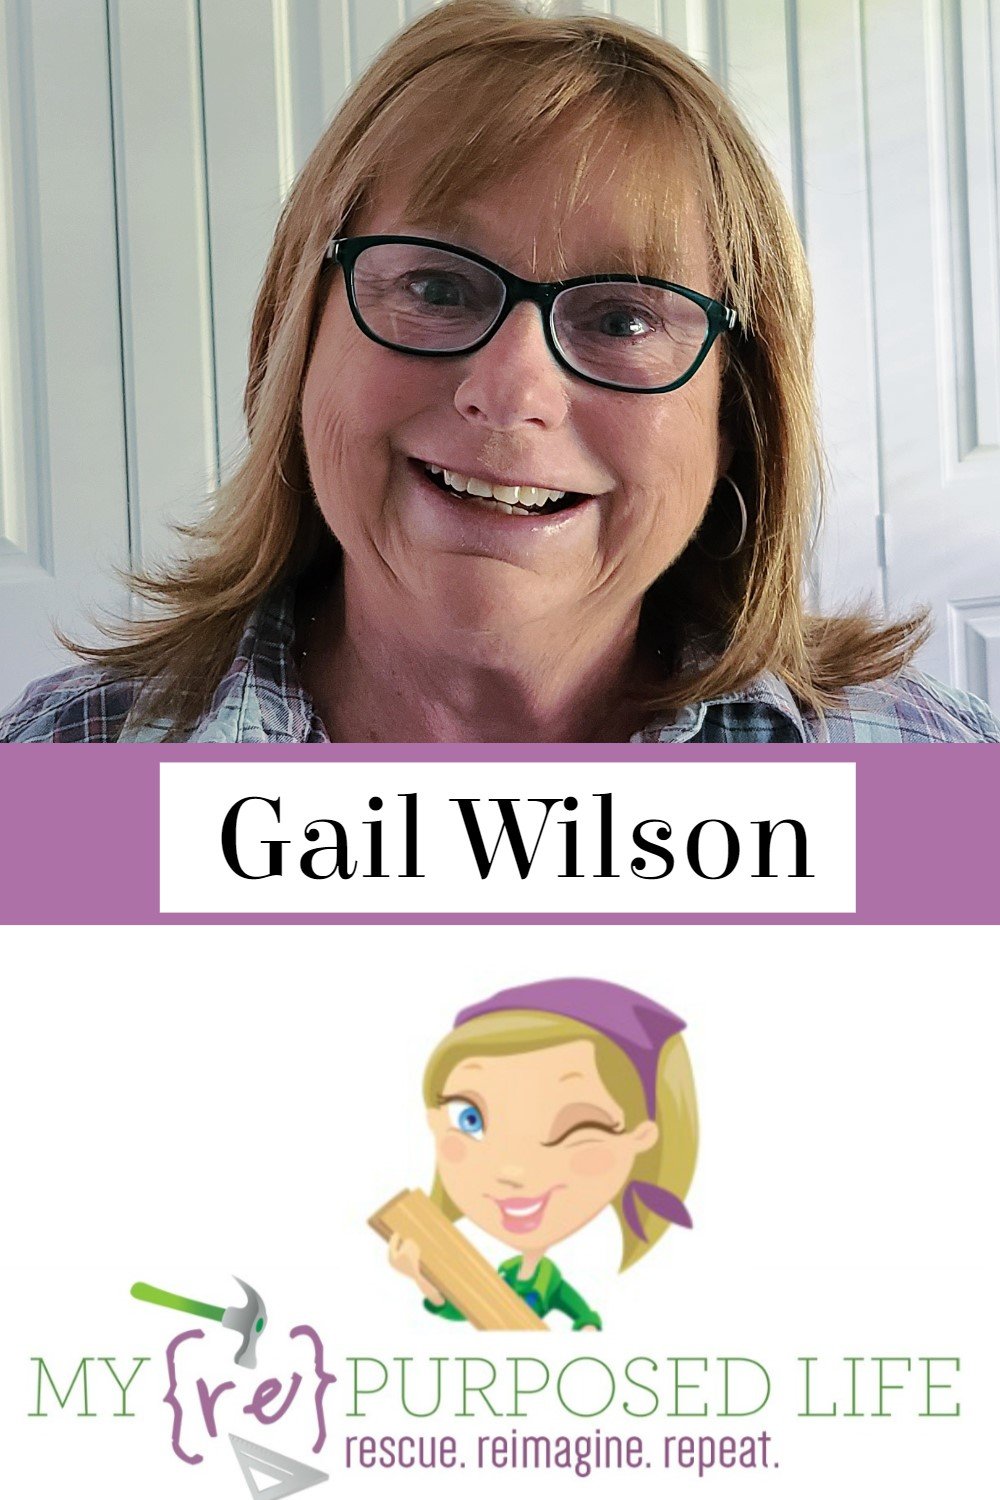 Gail Wilson is the author and mastermind behind My Repurposed Life. She is obsessed with finding potential in unexpected places and believes that with a little hard work and imagination, any old thing can be made useful again, including herself! Gail reinvented herself during a midlife crisis and has found purpose again. Gail will guide you step by step with each tutorial as she hopes you will find new ideas for old things and pick up a few tools along the way. via @repurposedlife